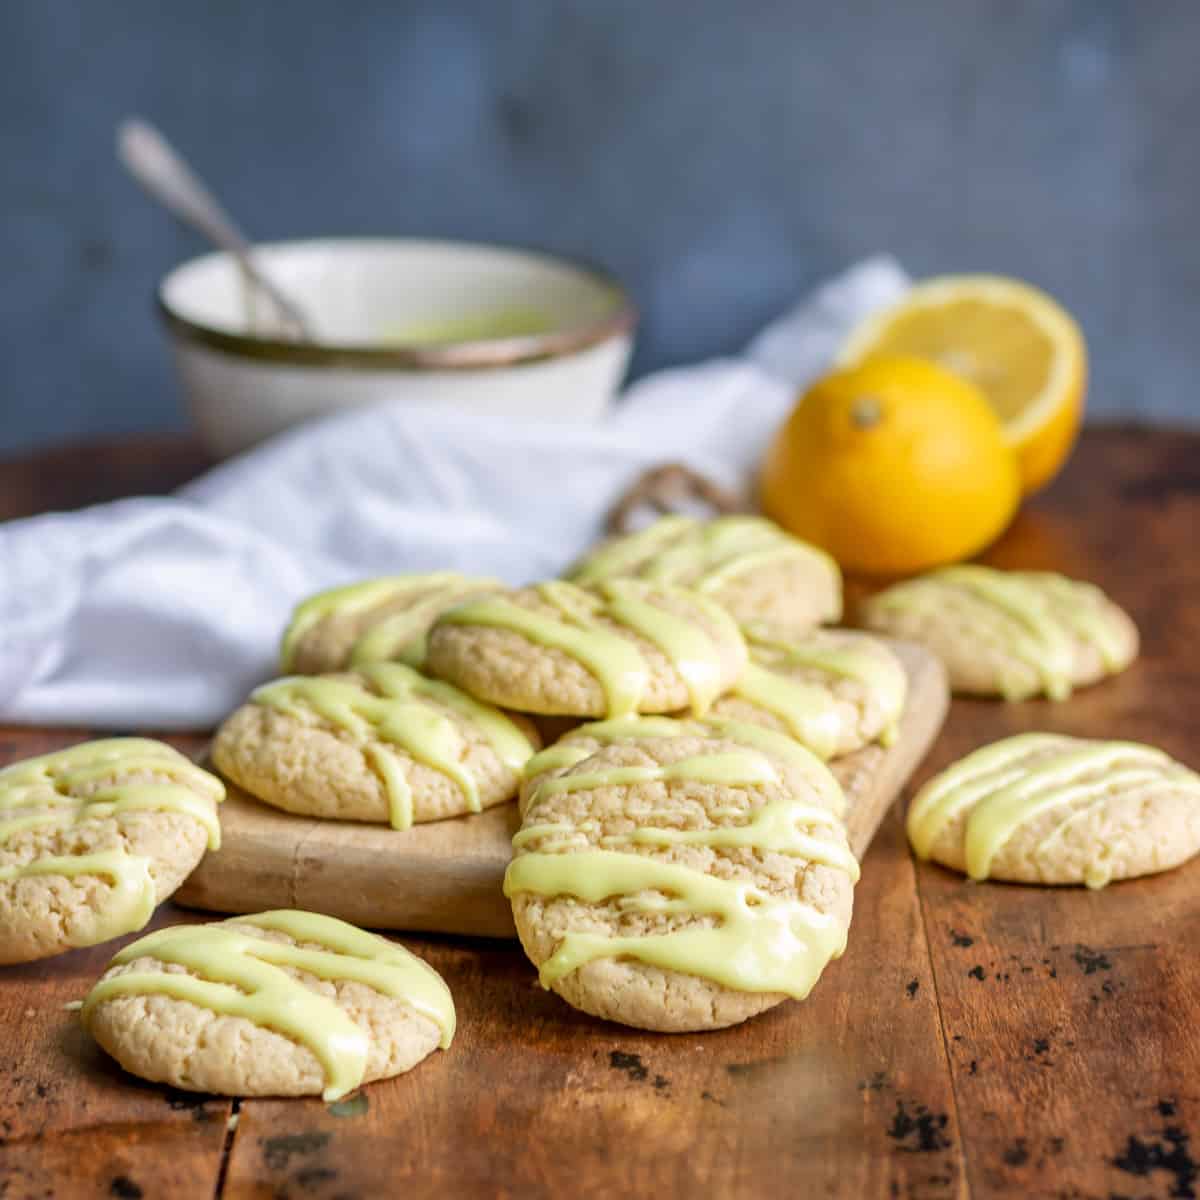 A pile of cookies with lemon glaze.